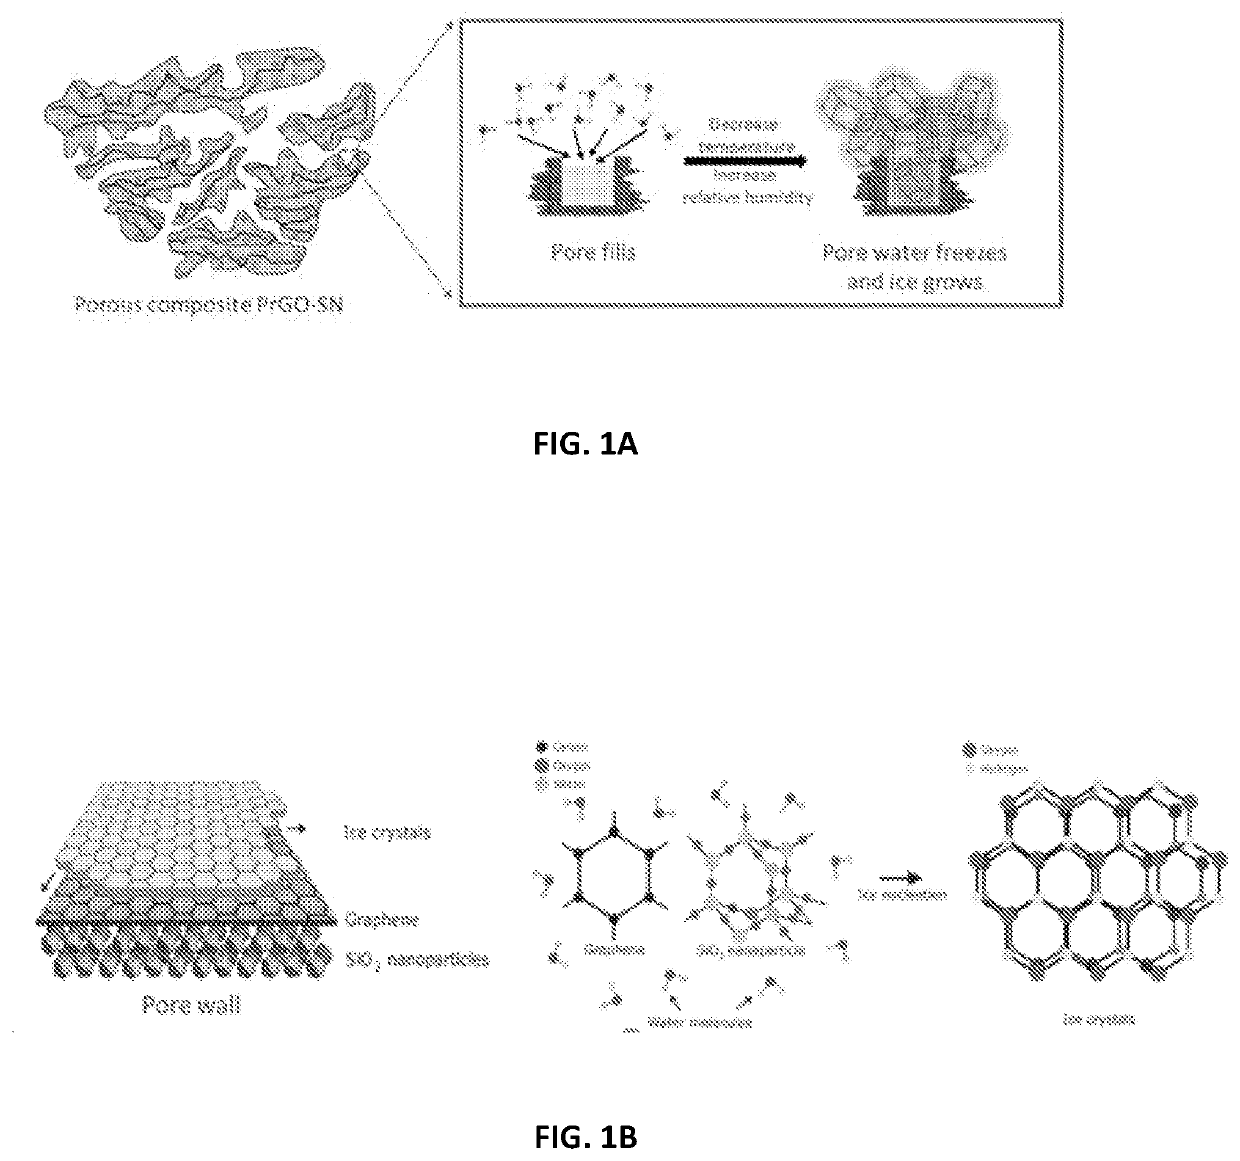 3D reduced graphene oxide/sio 2 composite for ice nucleation